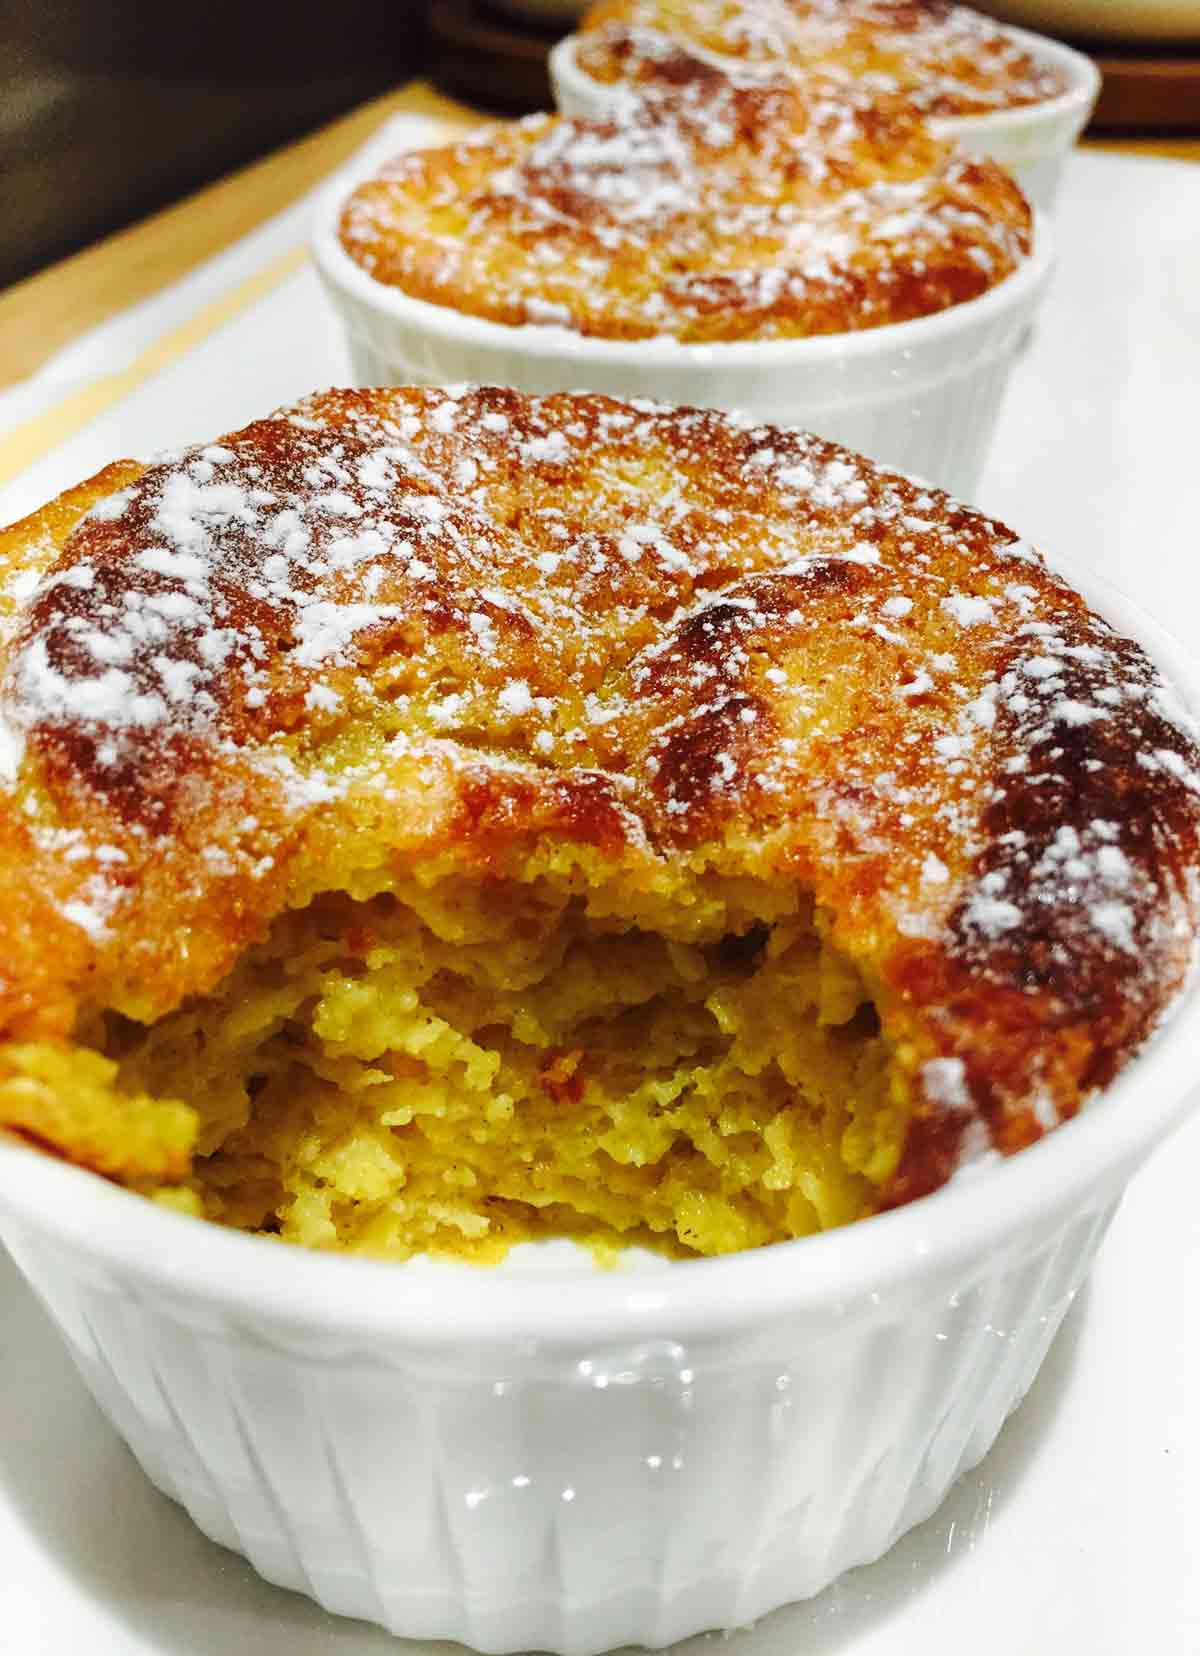 Taste this really scrumptious semolina and ricotta cheese soufflé, a delicate and naturally sweet cheese dessert worth sharing.